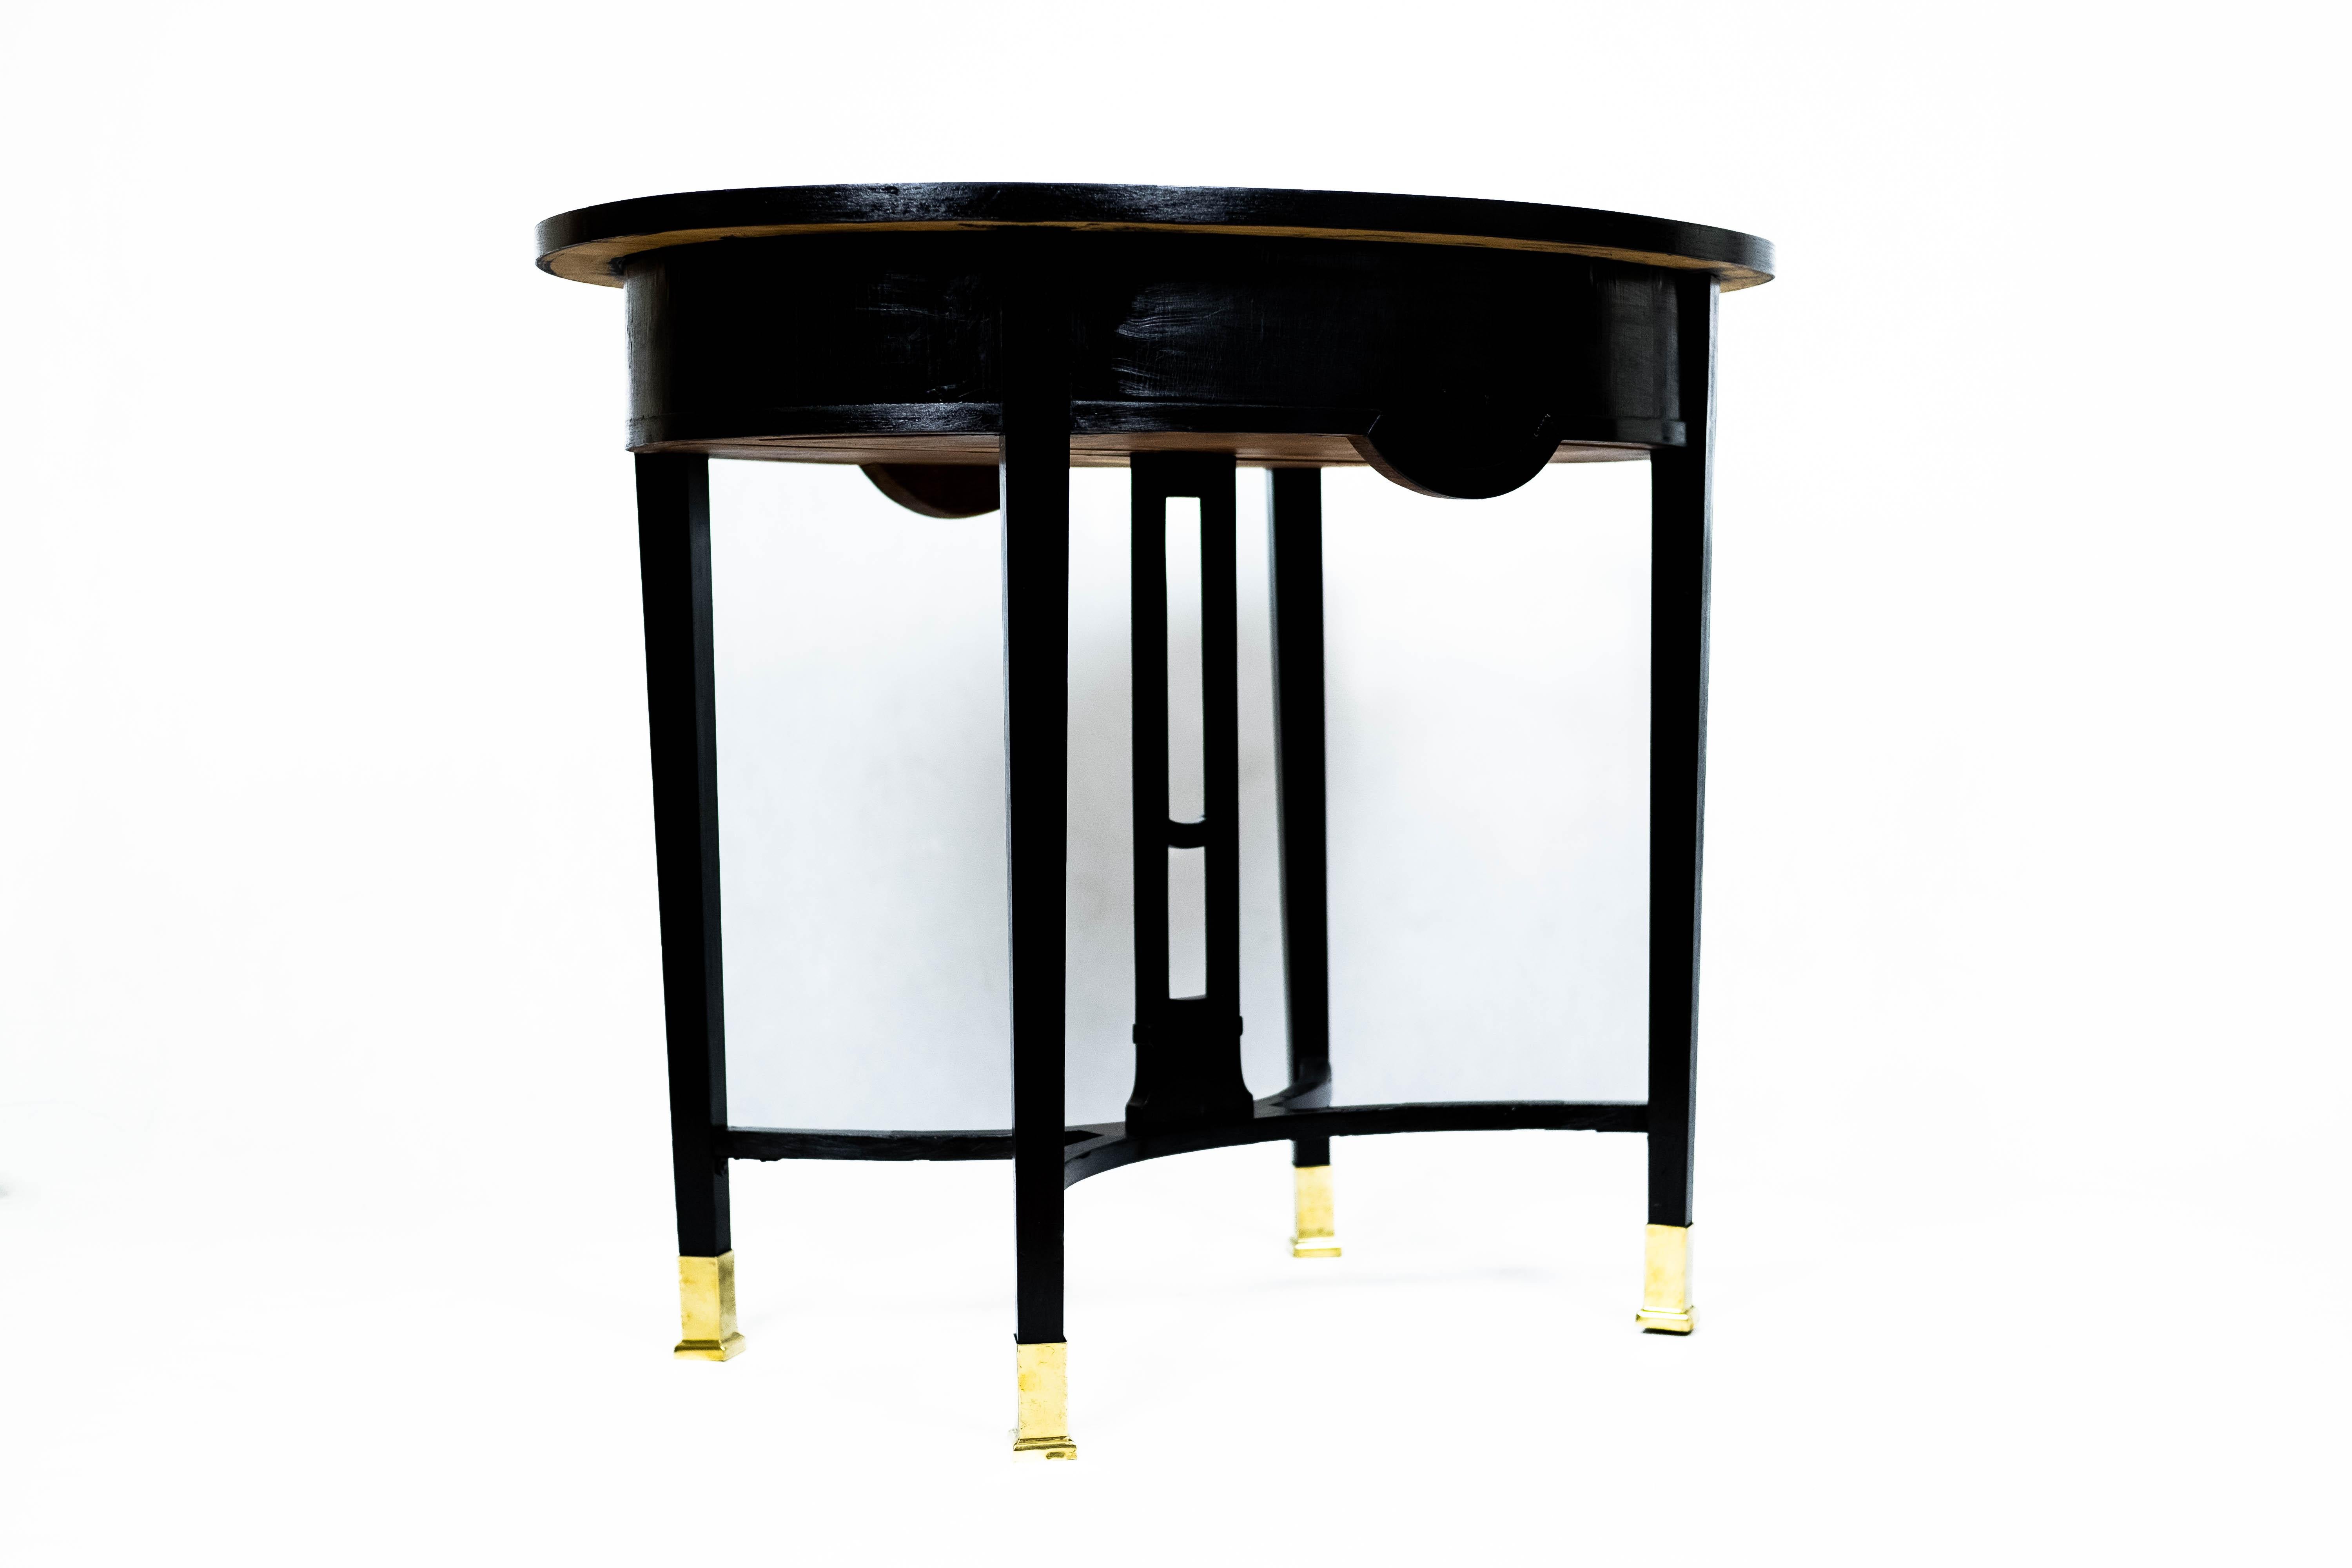 Small black Art Nouveau Table with Marble-Plate and Brass-Fittings (circa 1910) For Sale 1